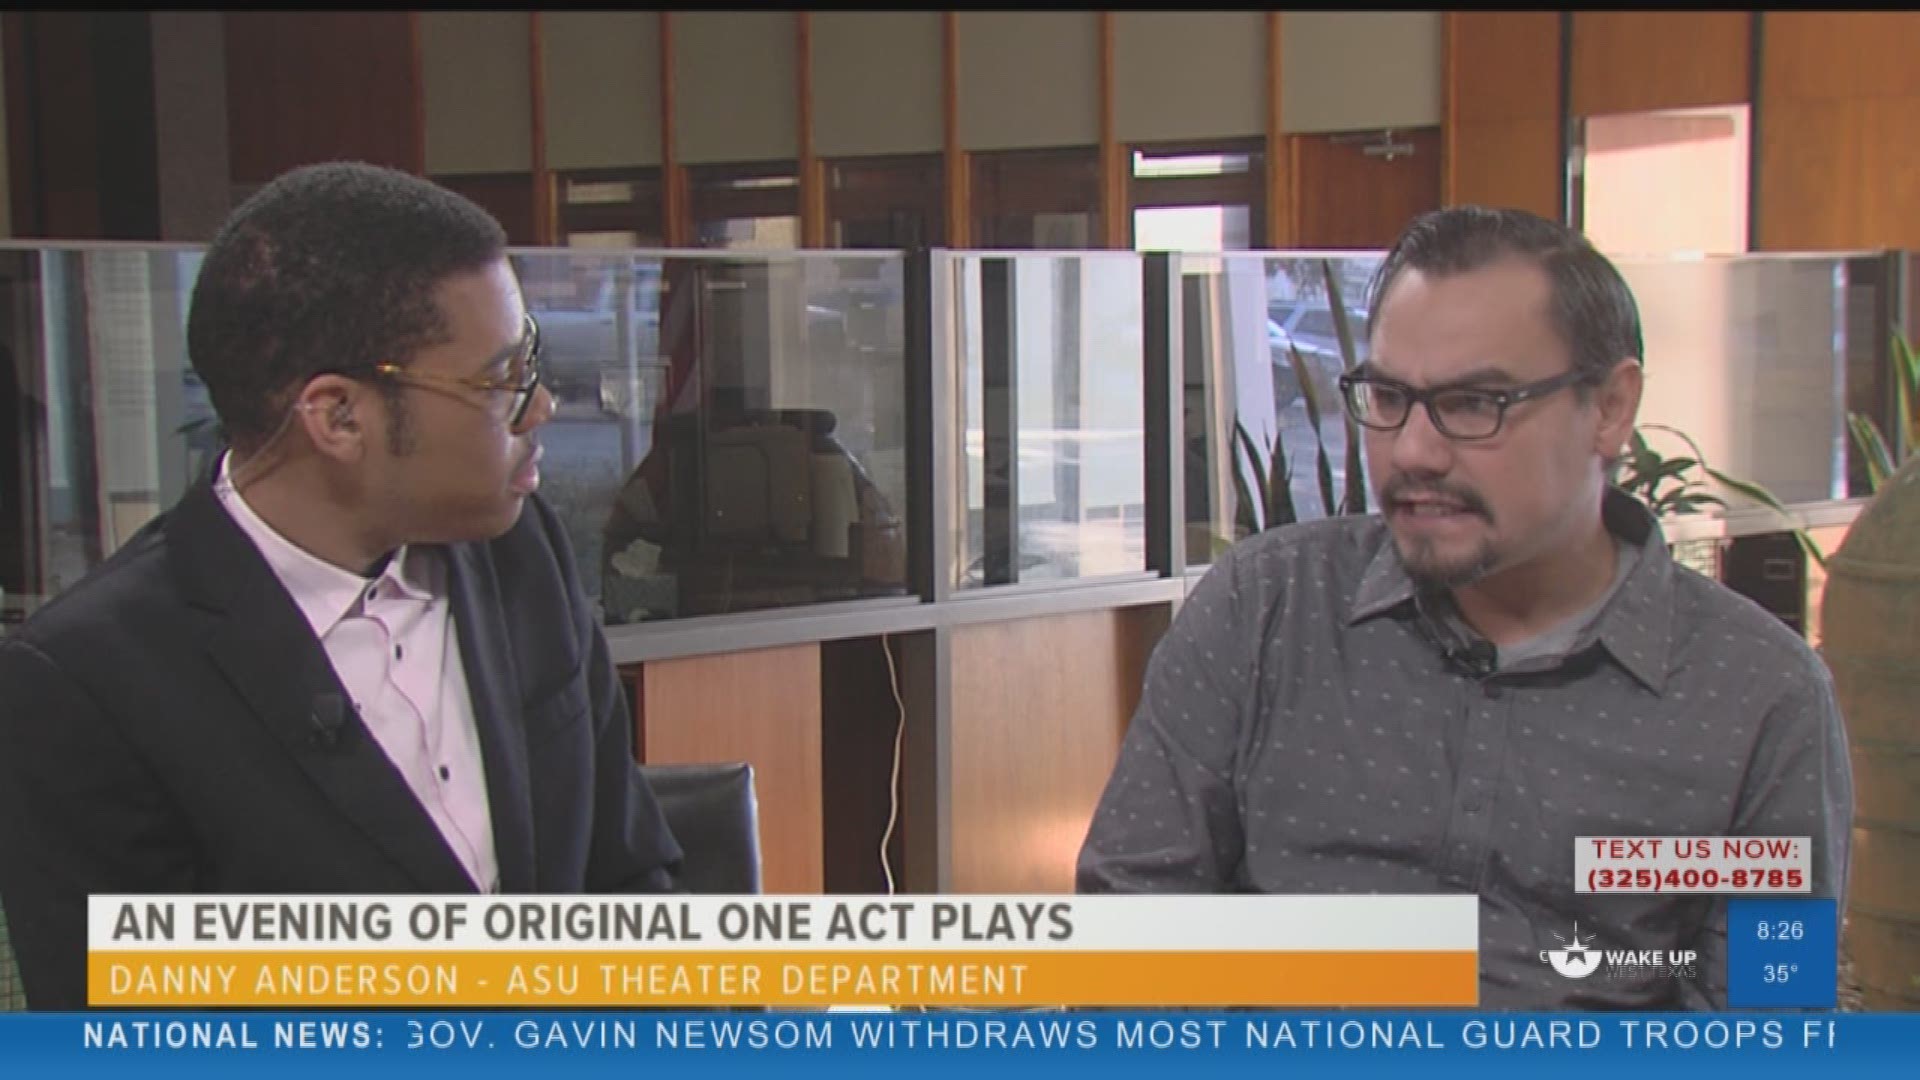 Our Malik Mingo spoke with Angelo State University about their upcoming production of original one act plays.